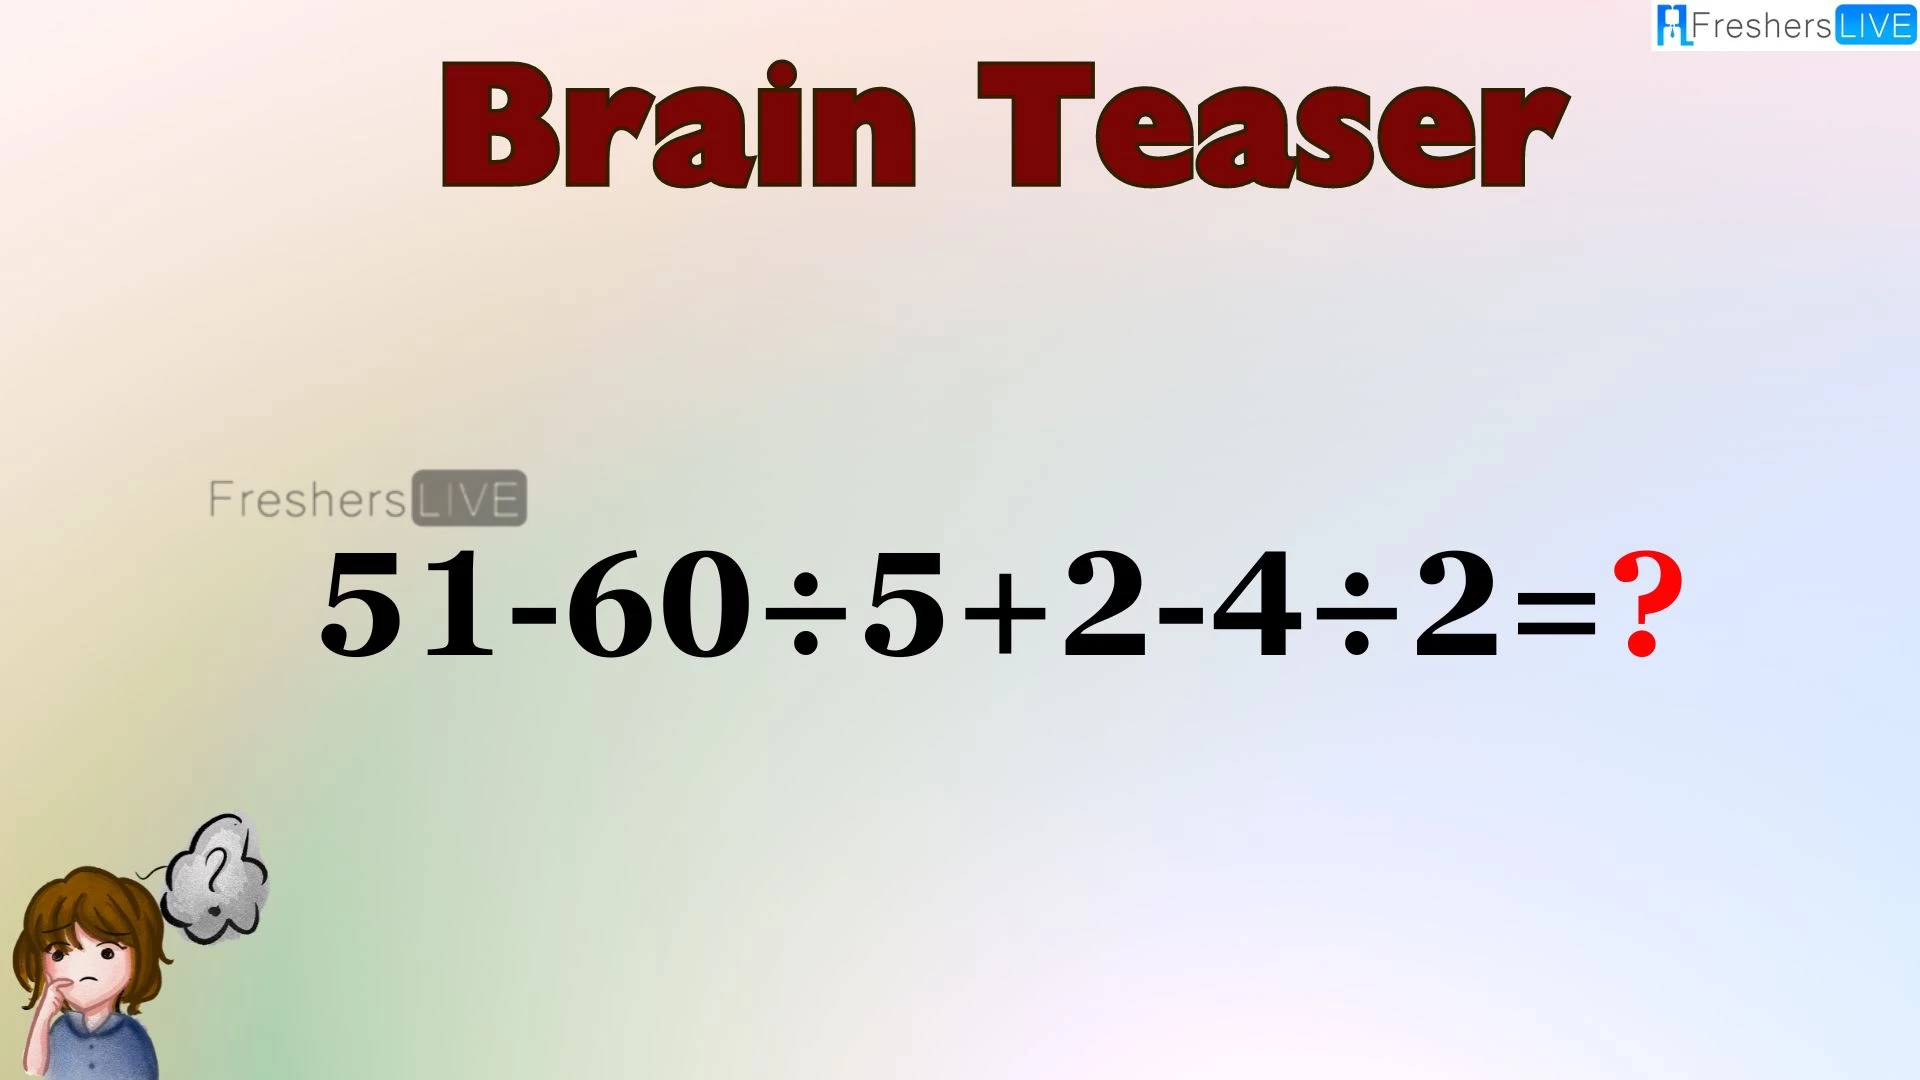 Can You Solve this Math Puzzle? Equate 51-60÷5+2-4÷2=?